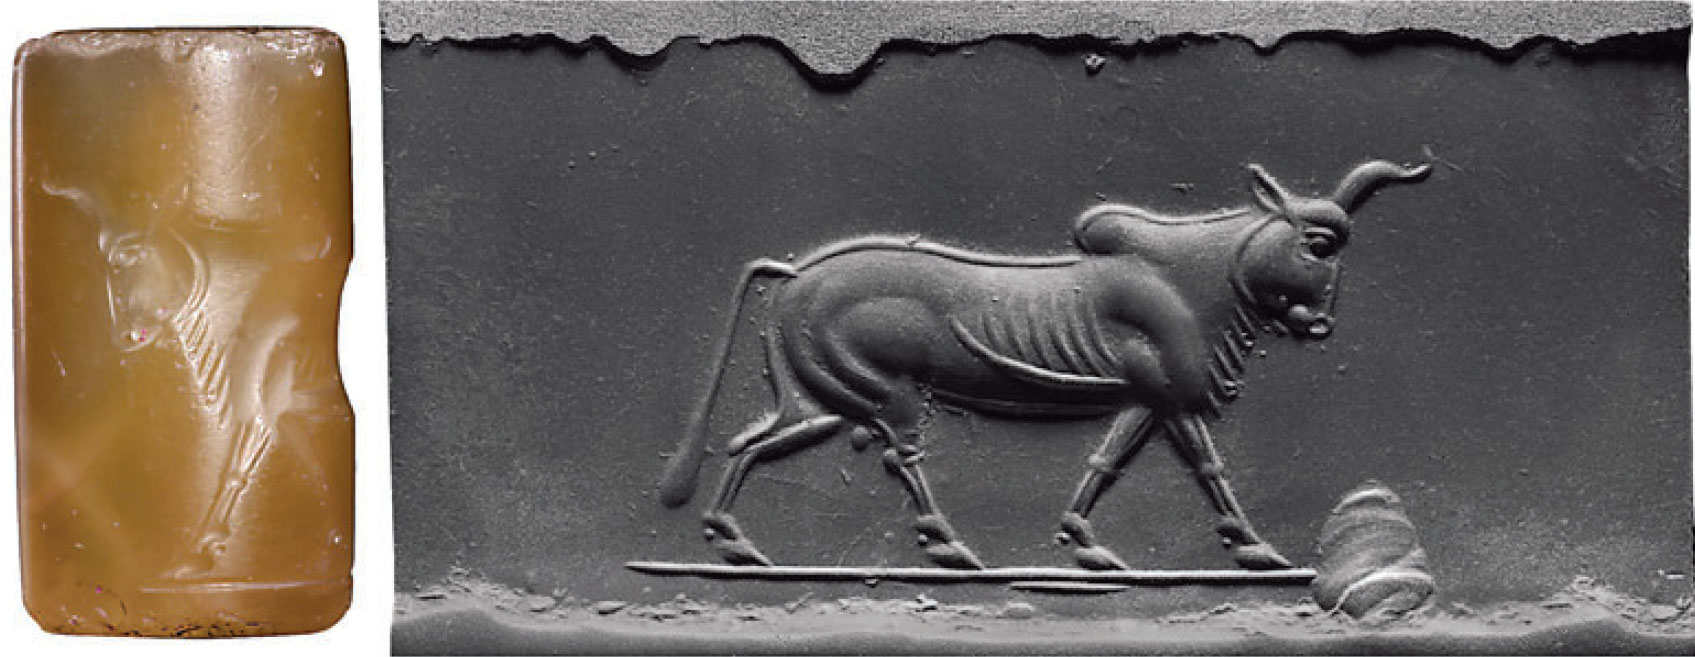 A seal made from chalcedony, 2.5 centimeter tall, shows a delicately formed striding bull. It dates from 499 to 400 BCE, which led Porada to observe it “recalls Greek gems” of the same period “in its exquisite engraving and spacious background.” To Babcock this prompts speculation about not only possible Greek influence but also the further possibility that this seal’s sculptor may have been Greek, perhaps living in captivity. 